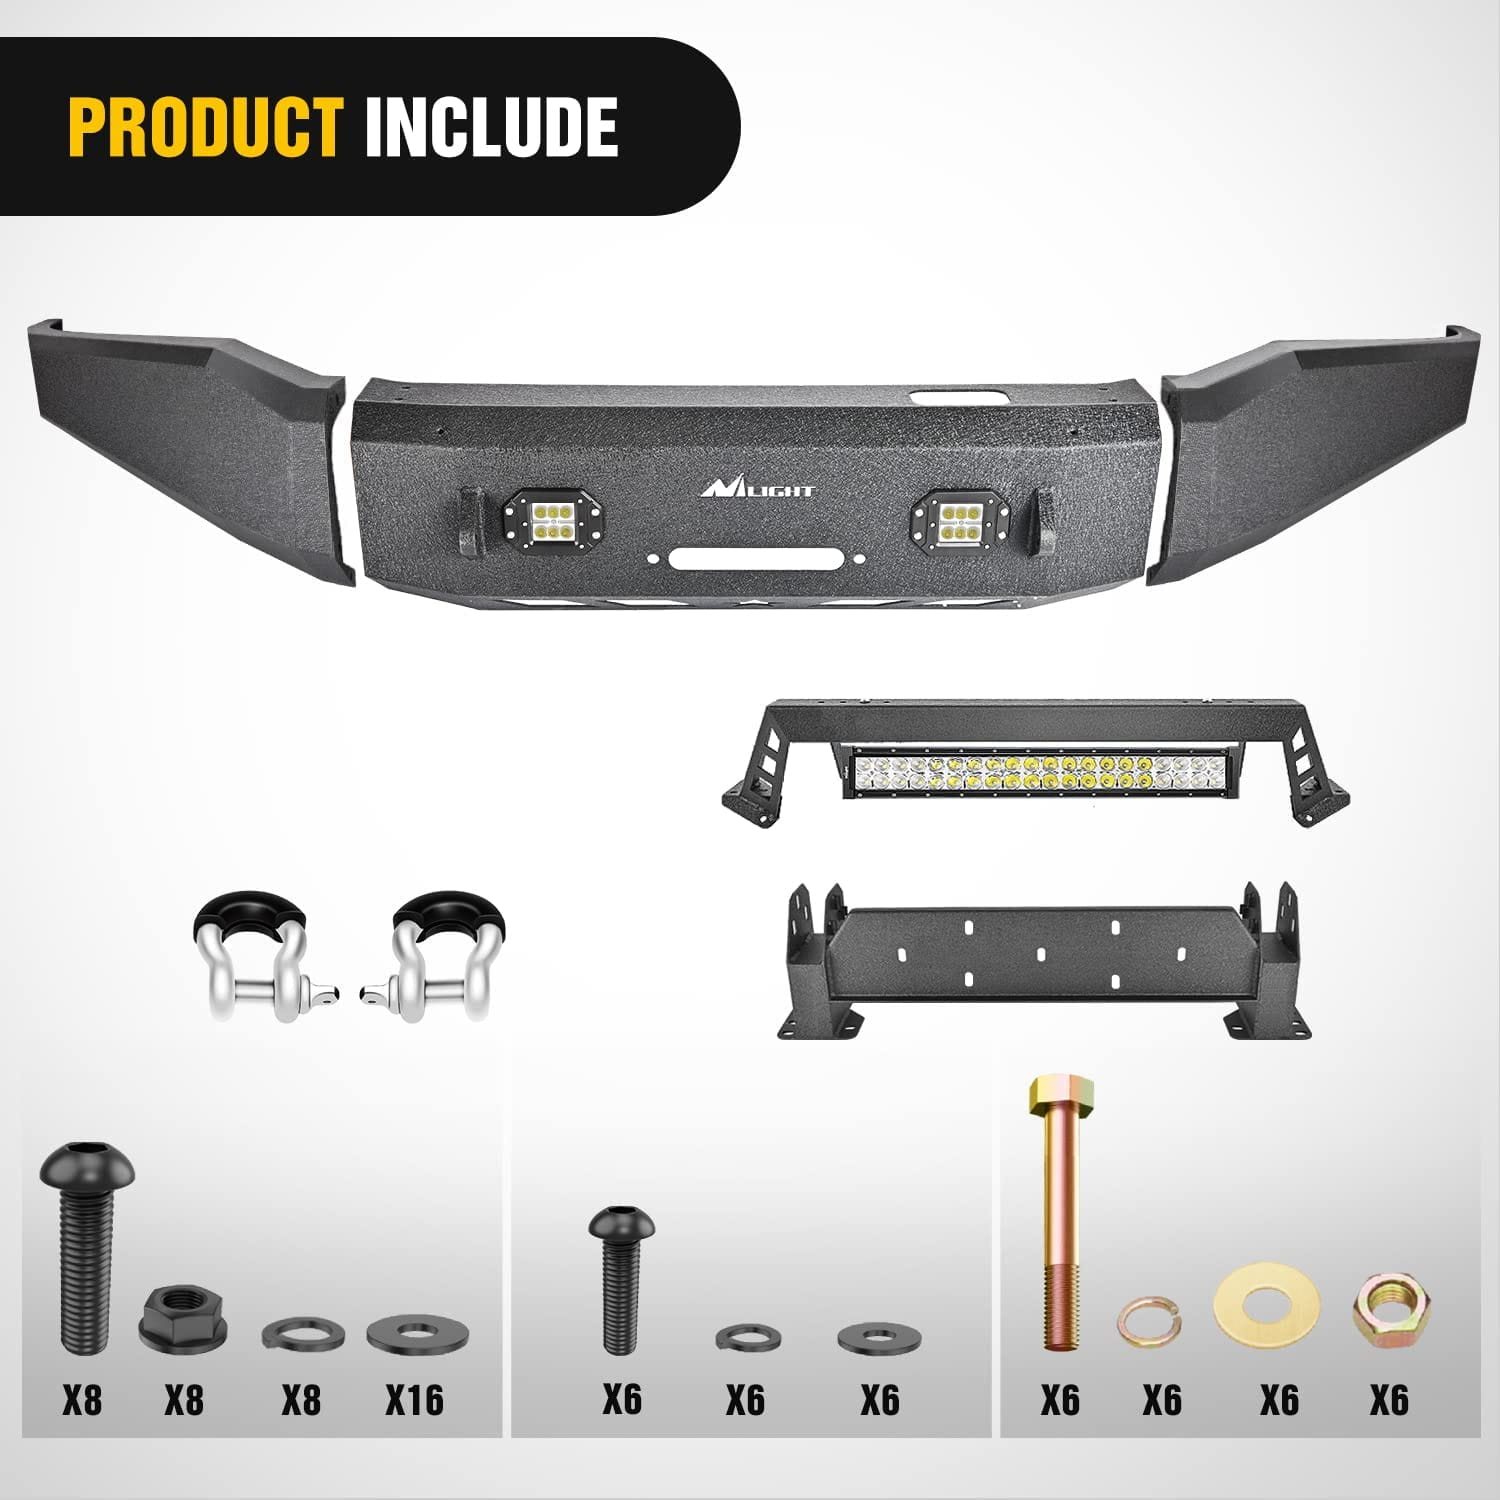 2007-2013 Toyota Tundra Front Bumper Full Width Solid Steel with Winch Plate 120W LED Light Bar 2Pcs 18W Light Pods Nilight